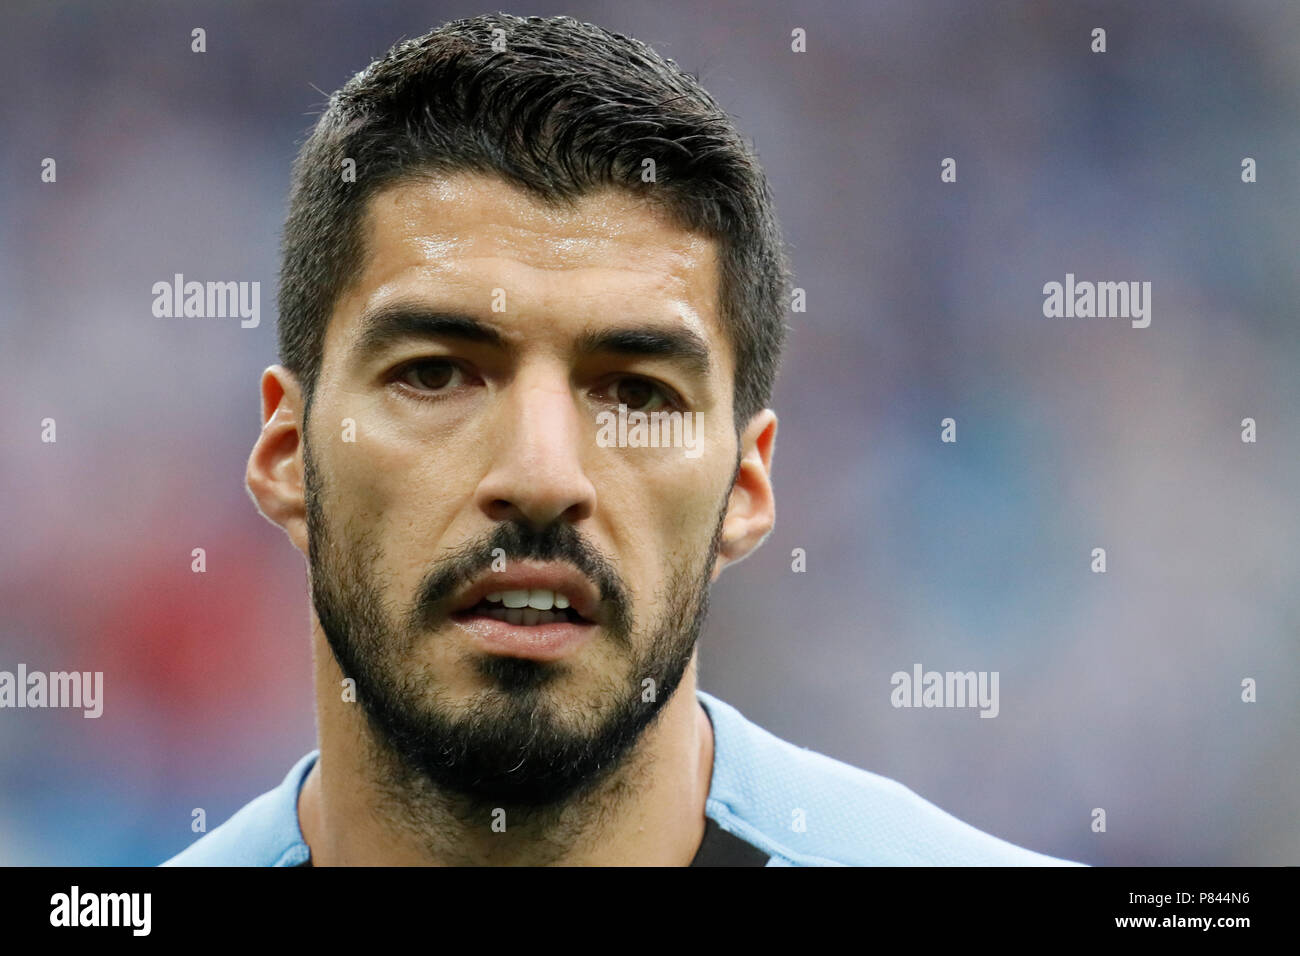 NIZHNY NOVGOROD, RUSSIA - JULY 6: Luis Suarez of Uruguay national team during the 2018 FIFA World Cup Russia Quarter Final match between Uruguay and France at Nizhny Novgorod Stadium on July 6, 2018 in Nizhny Novgorod, Russia. (MB Media) Stock Photo